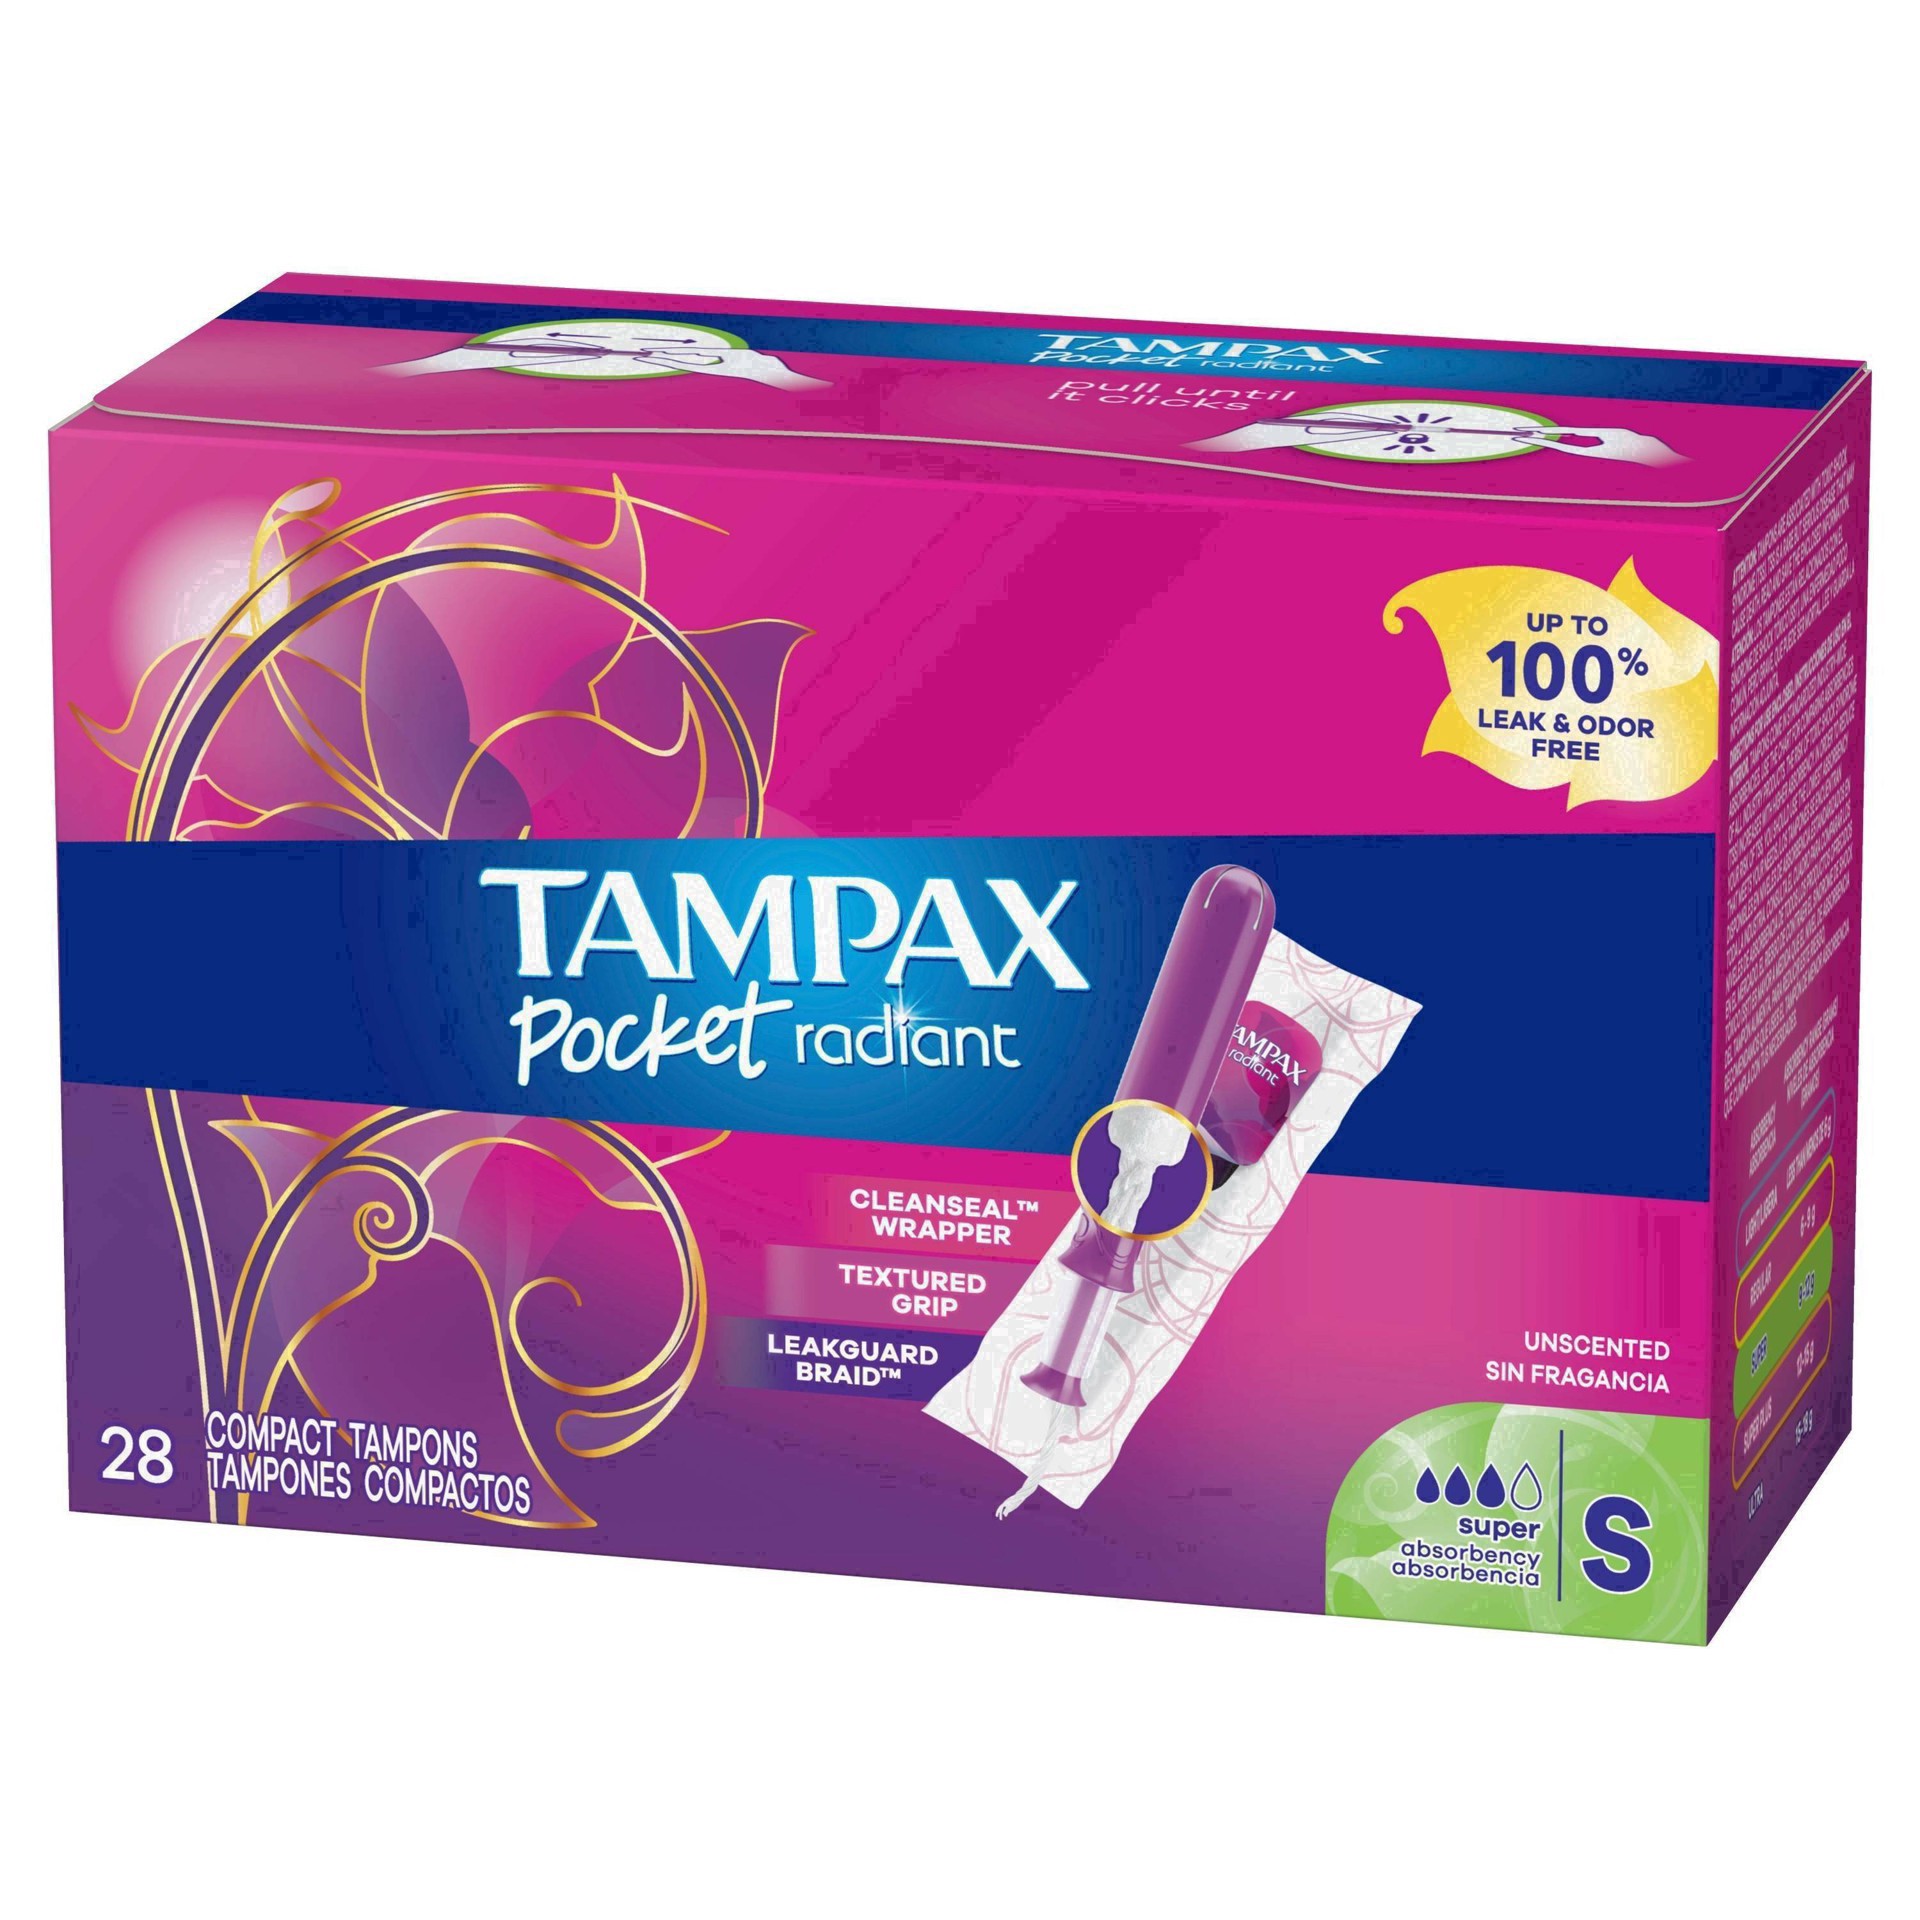 slide 64 of 94, Tampax Pocket Radiant Compact Plastic Tampons, With LeakGuard Braid, Super Absorbency, Unscented, 28 Count, 28 ct